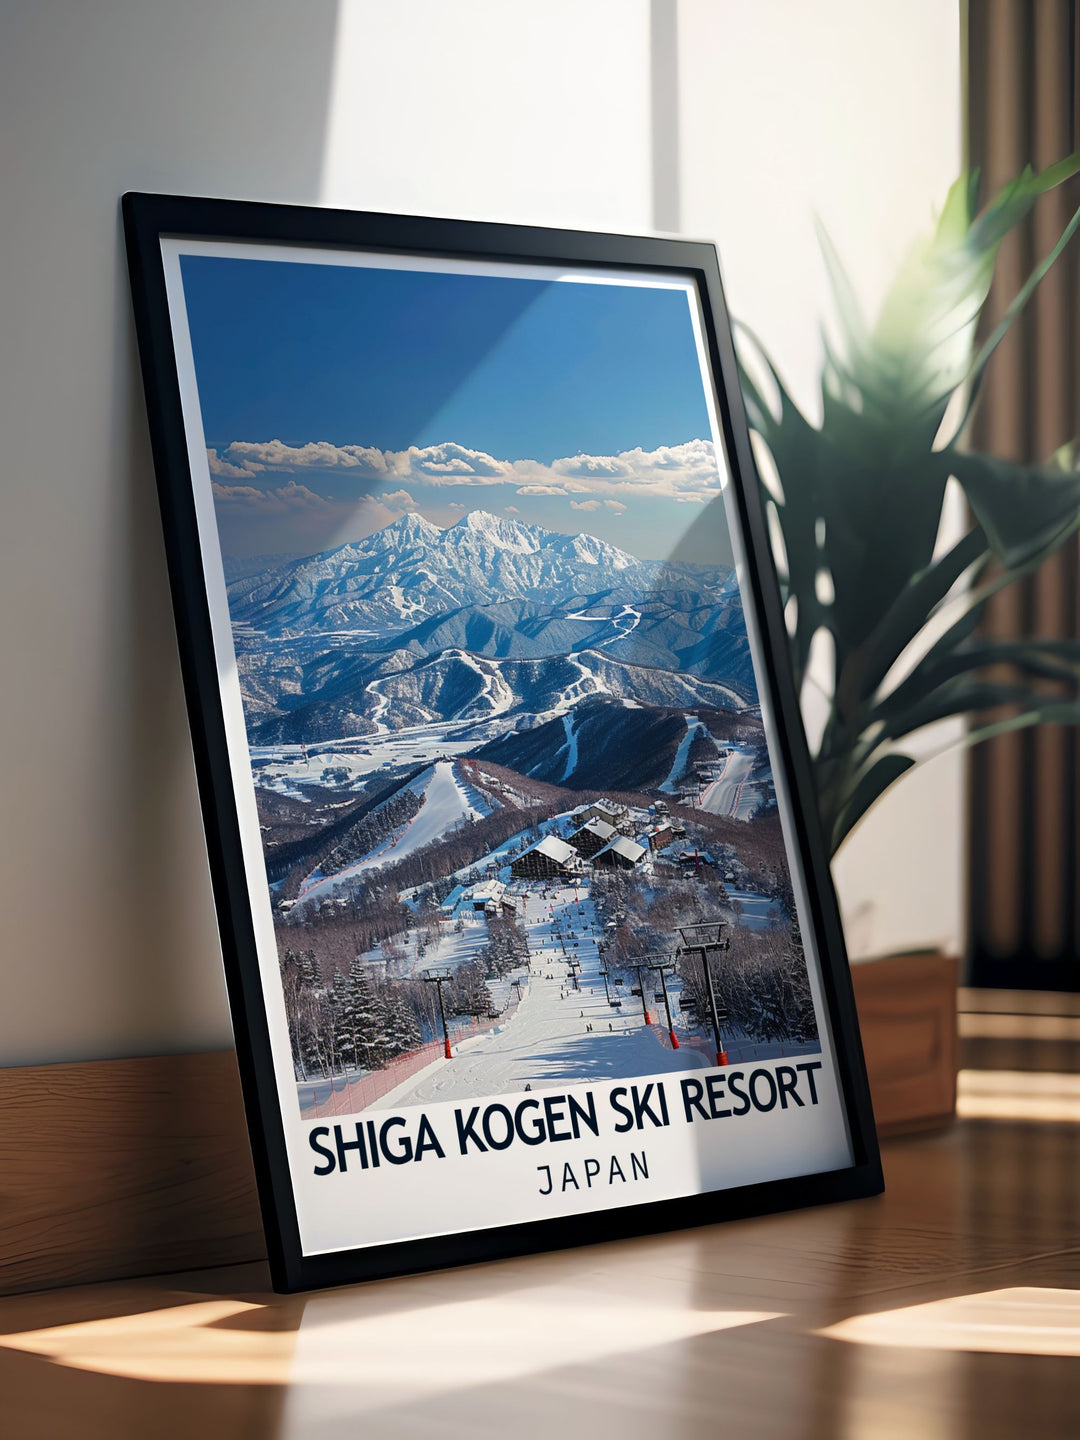 Shiga Kogen is beautifully illustrated in this poster, featuring its interconnected ski areas and powdery snow, making it an excellent addition for those who dream of an exhilarating winter adventure in Japan.